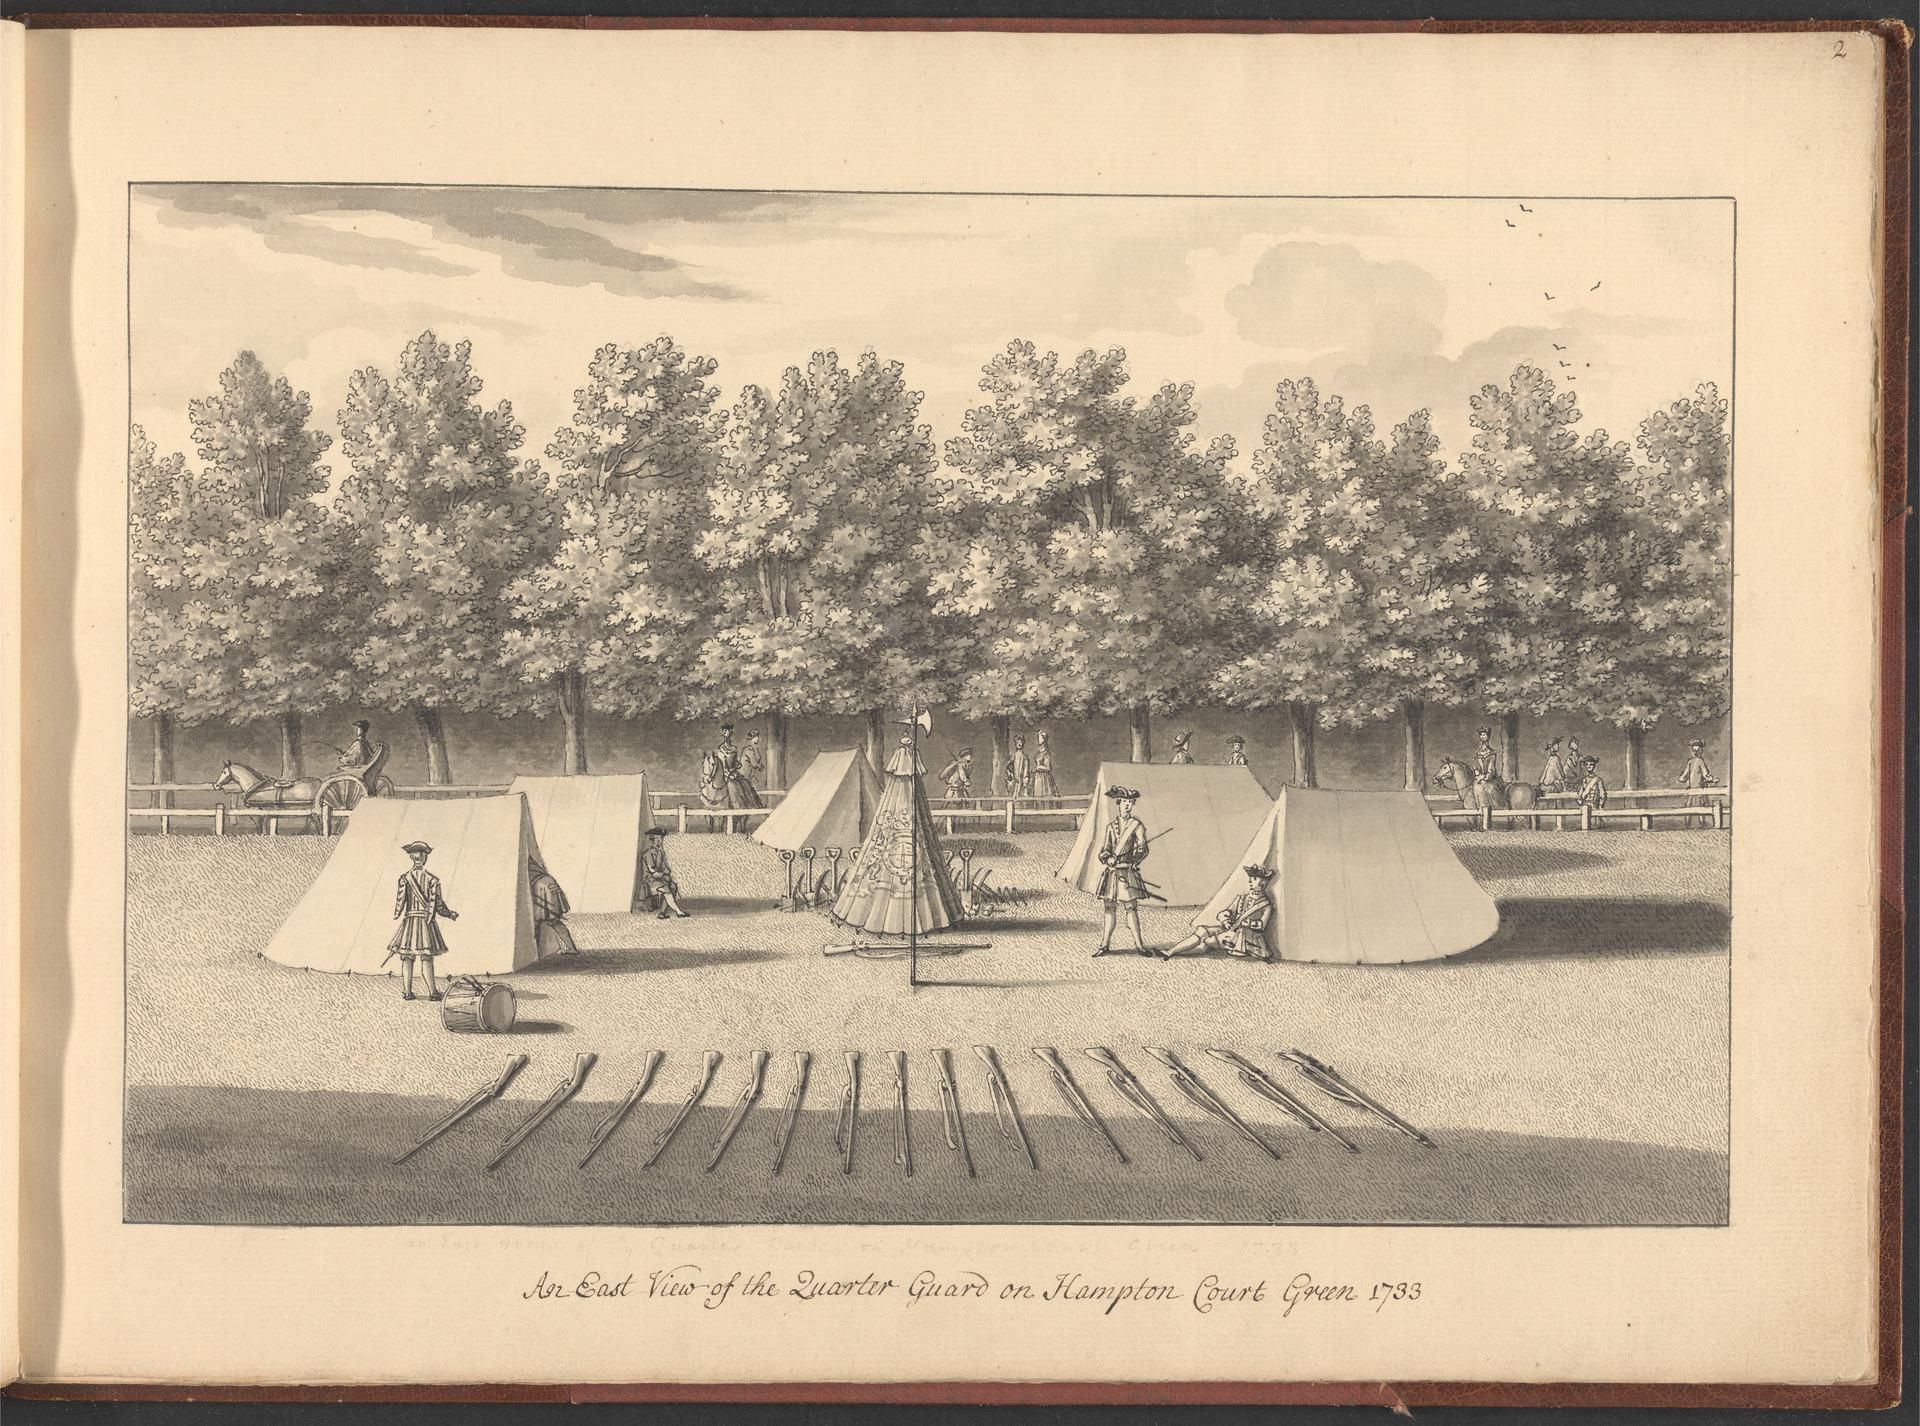 A Volume of ten drawings of Hampton Court taken by the life - An East View of the Quarter Guard on Hampton Court Green 1733